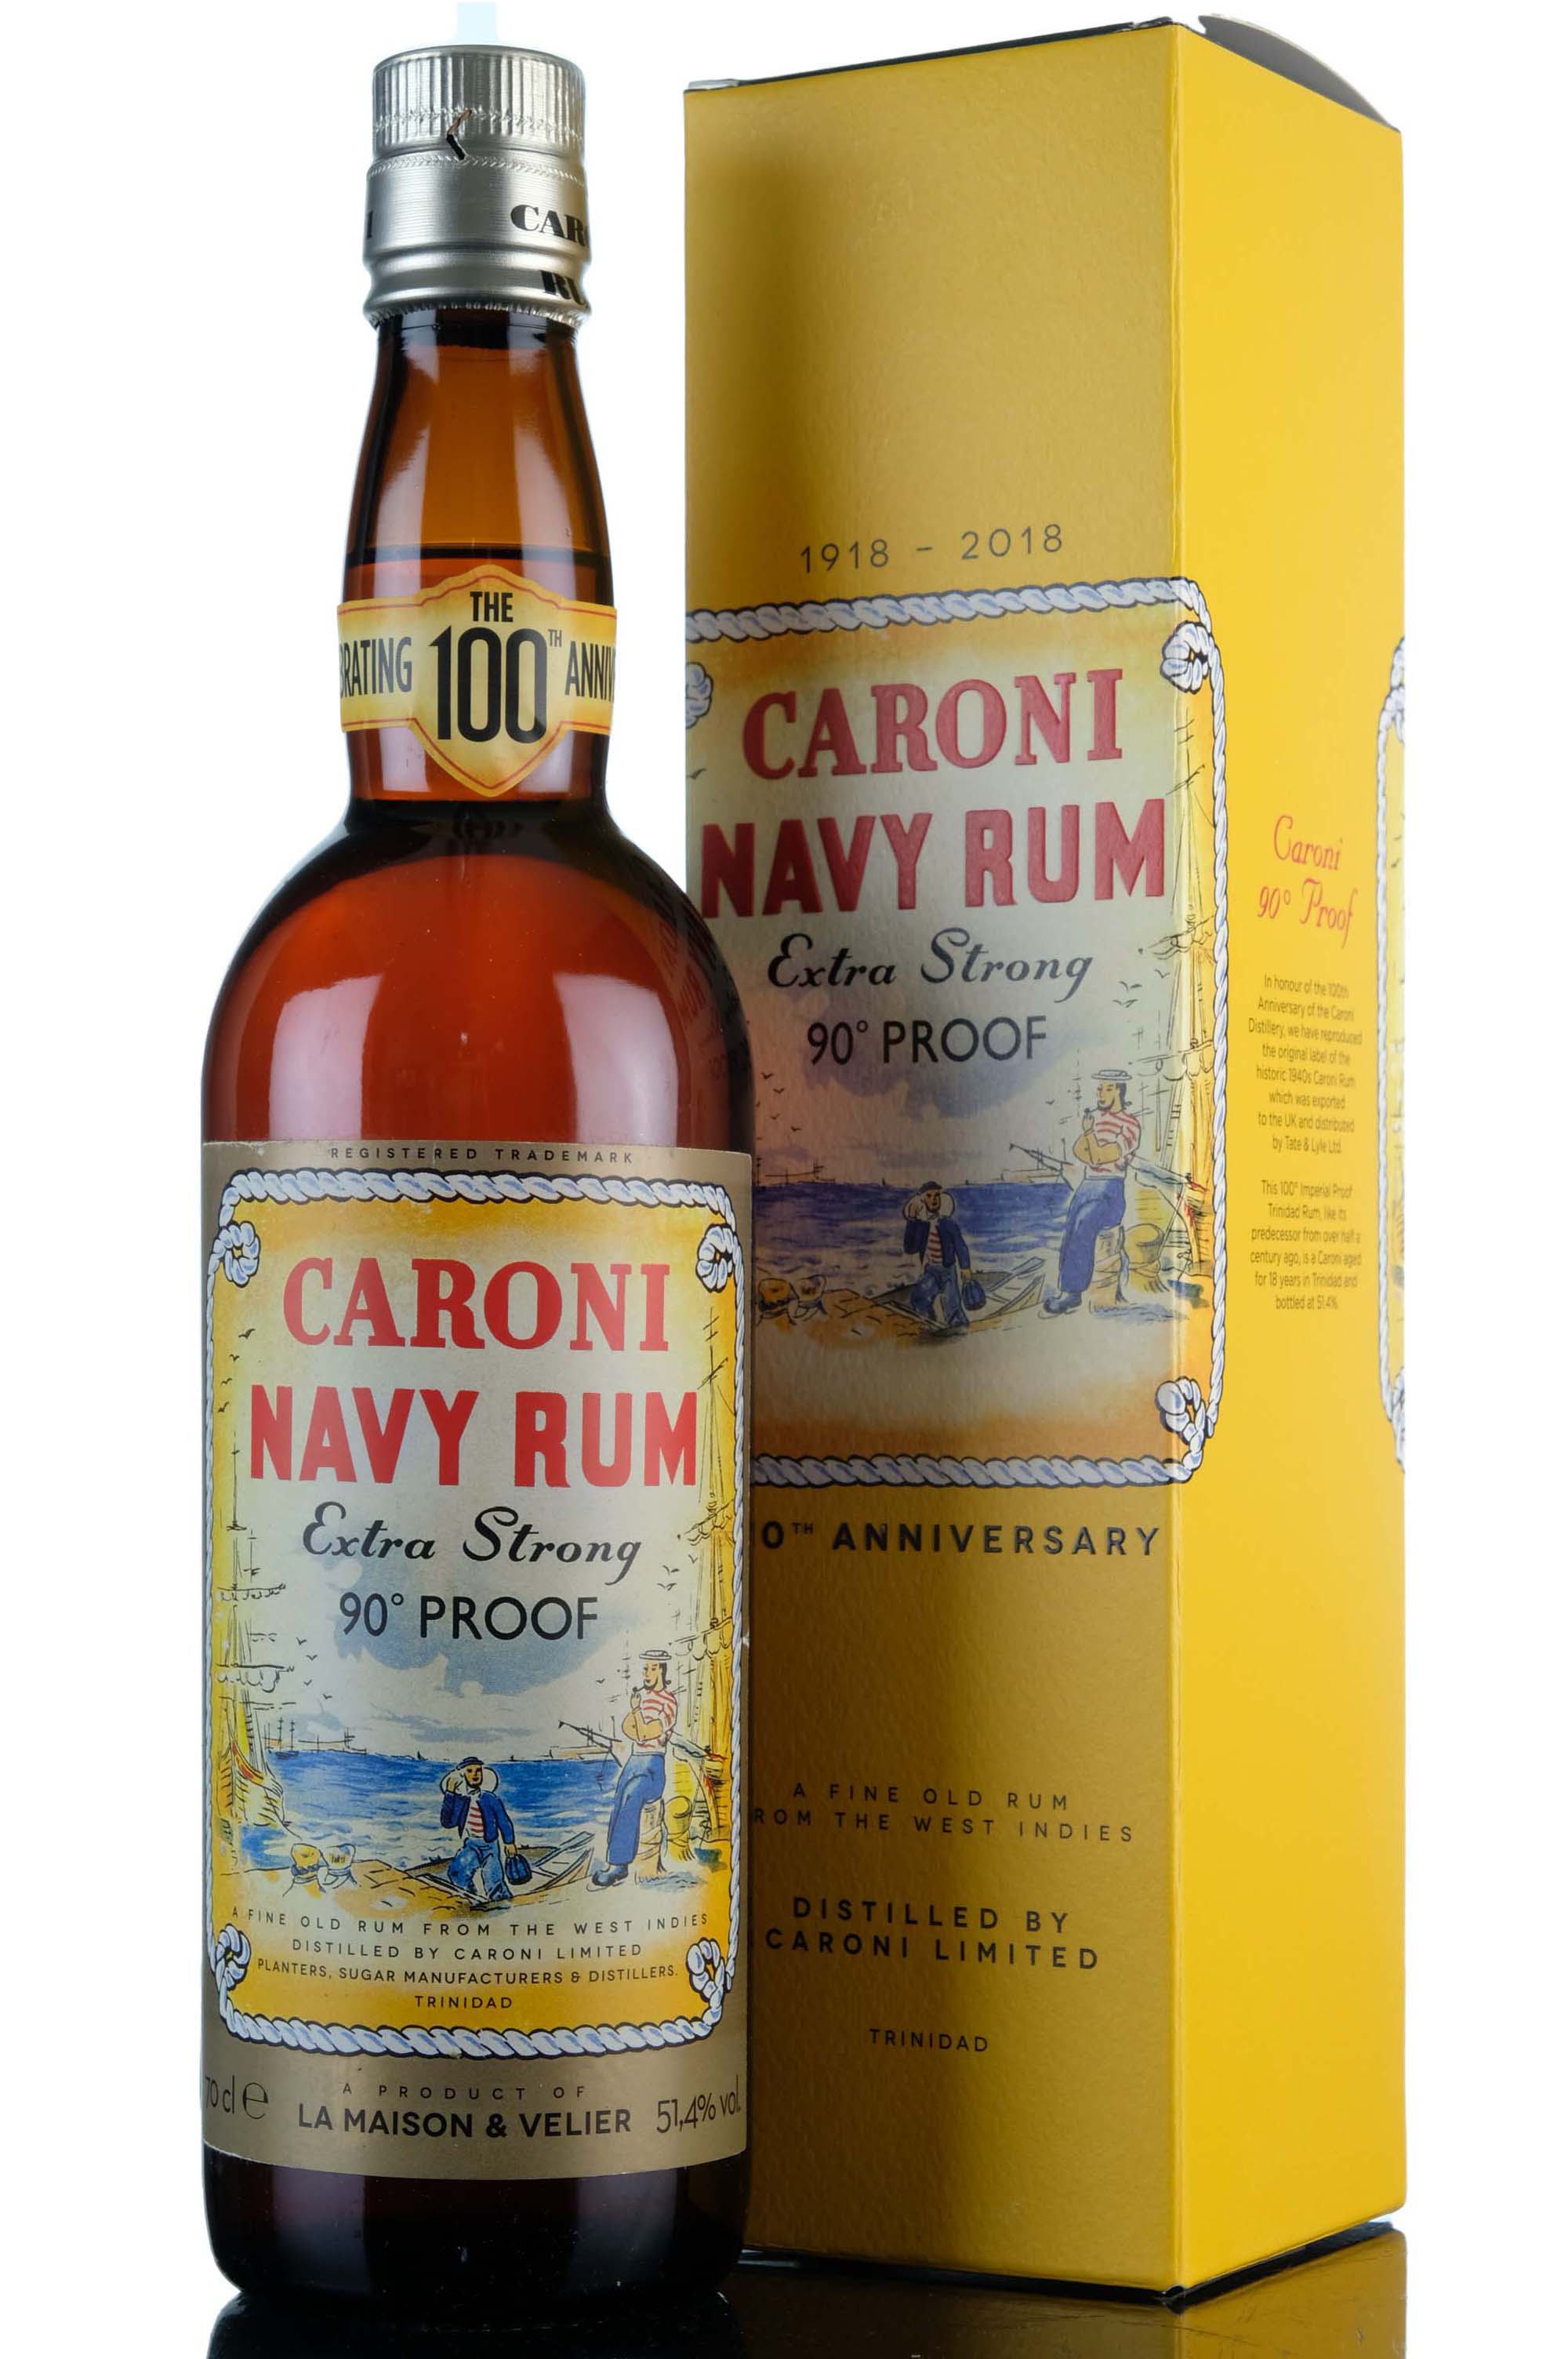 Caroni Extra Strong Navy Rum 18 Year Old - 100th Anniversary 1918-2018